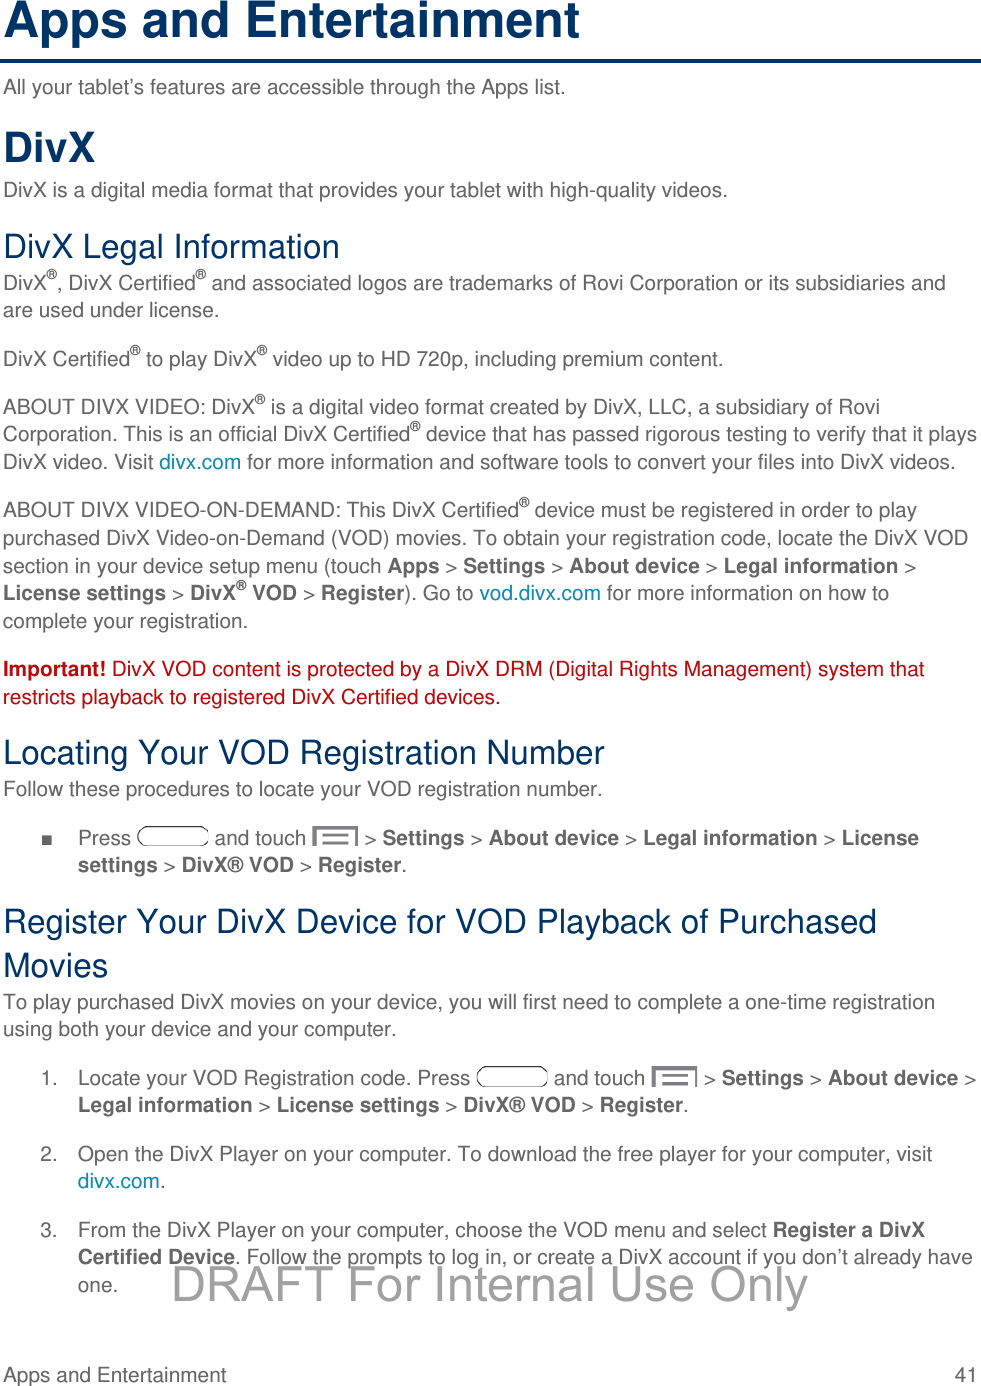 Apps and Entertainment All your tablet’s features are accessible through the Apps list. DivX DivX is a digital media format that provides your tablet with high-quality videos. DivX Legal Information DivX®, DivX Certified® and associated logos are trademarks of Rovi Corporation or its subsidiaries and are used under license. DivX Certified® to play DivX® video up to HD 720p, including premium content.  ABOUT DIVX VIDEO: DivX® is a digital video format created by DivX, LLC, a subsidiary of Rovi Corporation. This is an official DivX Certified® device that has passed rigorous testing to verify that it plays DivX video. Visit divx.com for more information and software tools to convert your files into DivX videos. ABOUT DIVX VIDEO-ON-DEMAND: This DivX Certified® device must be registered in order to play purchased DivX Video-on-Demand (VOD) movies. To obtain your registration code, locate the DivX VOD section in your device setup menu (touch Apps &gt; Settings &gt; About device &gt; Legal information &gt; License settings &gt; DivX® VOD &gt; Register). Go to vod.divx.com for more information on how to complete your registration.  Important! DivX VOD content is protected by a DivX DRM (Digital Rights Management) system that restricts playback to registered DivX Certified devices. Locating Your VOD Registration Number Follow these procedures to locate your VOD registration number. ■ Press   and touch   &gt; Settings &gt; About device &gt; Legal information &gt; License settings &gt; DivX® VOD &gt; Register. Register Your DivX Device for VOD Playback of Purchased Movies To play purchased DivX movies on your device, you will first need to complete a one-time registration using both your device and your computer.  1. Locate your VOD Registration code. Press   and touch   &gt; Settings &gt; About device &gt; Legal information &gt; License settings &gt; DivX® VOD &gt; Register. 2. Open the DivX Player on your computer. To download the free player for your computer, visit divx.com. 3. From the DivX Player on your computer, choose the VOD menu and select Register a DivX Certified Device. Follow the prompts to log in, or create a DivX account if you don’t already have one. Apps and Entertainment 41   DRAFT For Internal Use Only